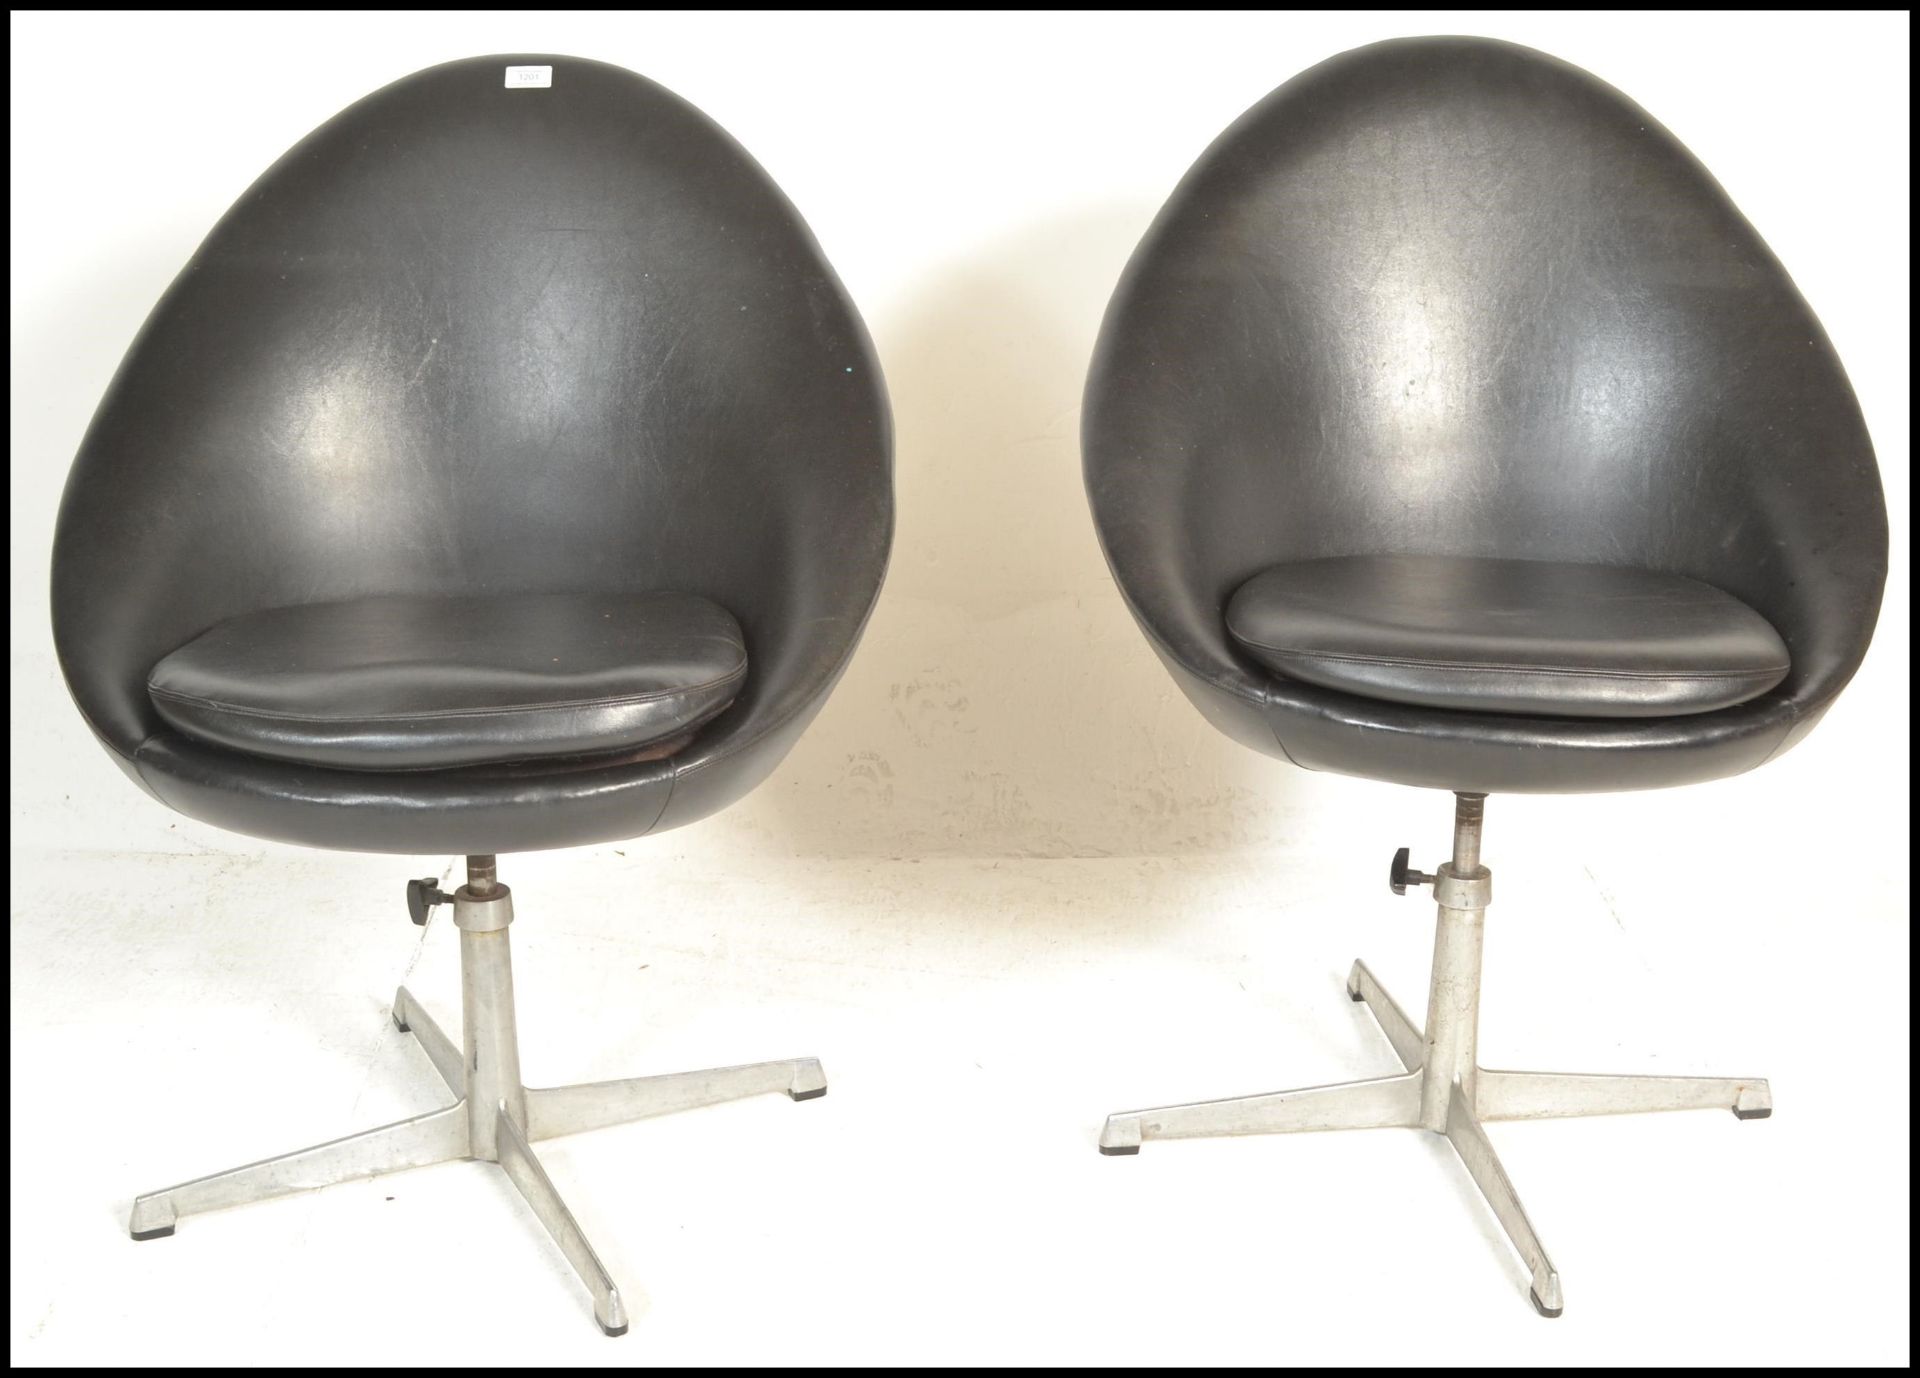 A pair of contemporary retro style swivel tub chairs, upholstered in a black leatherette material - Image 2 of 4